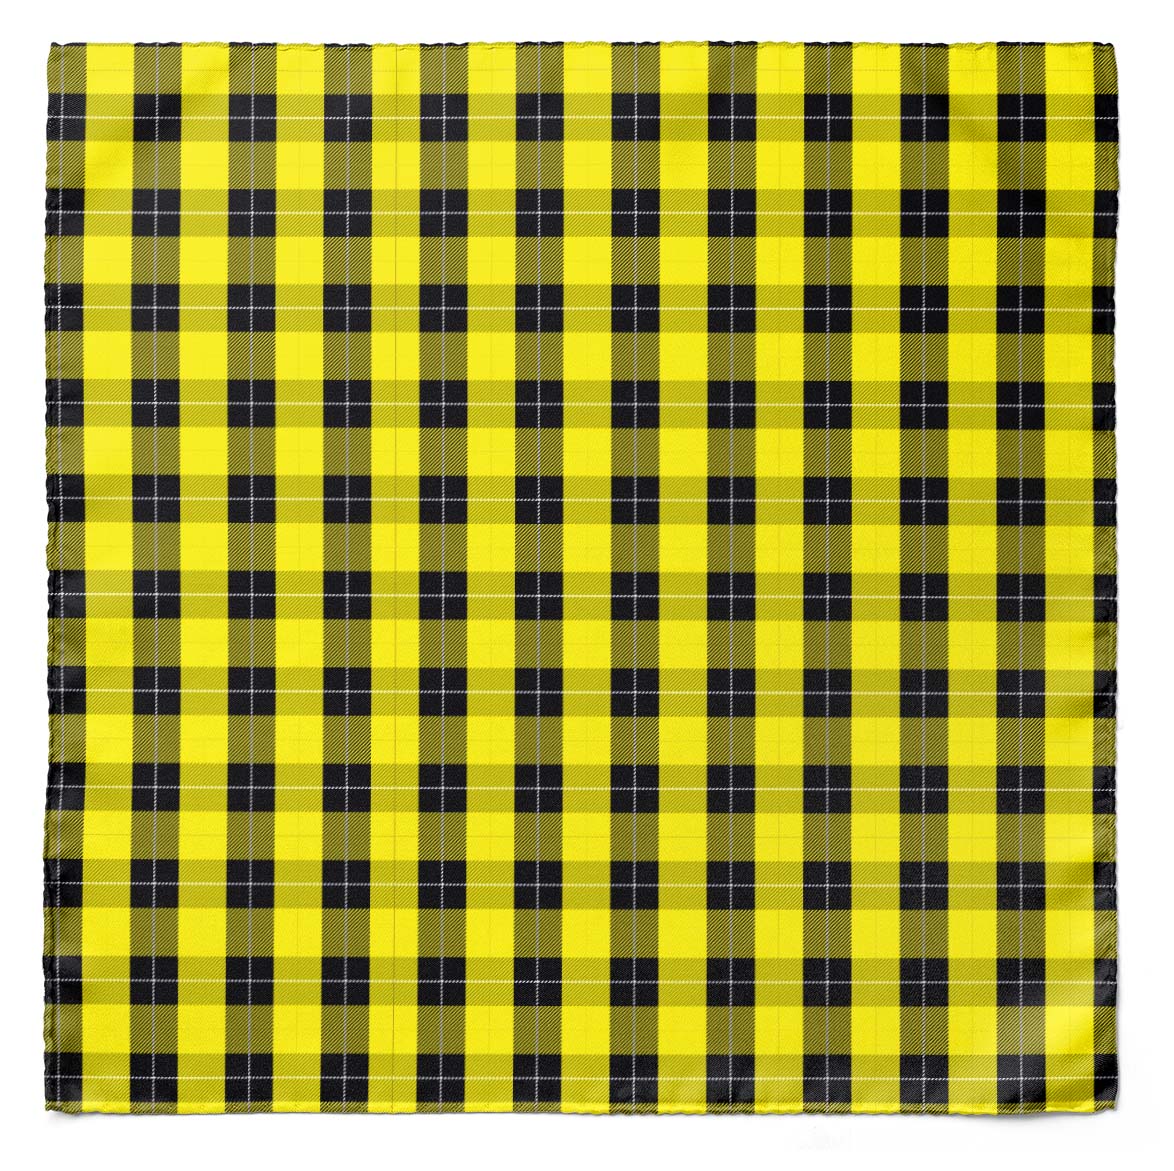 THE YELLOW CLASSIC PLAID SILK SCARF